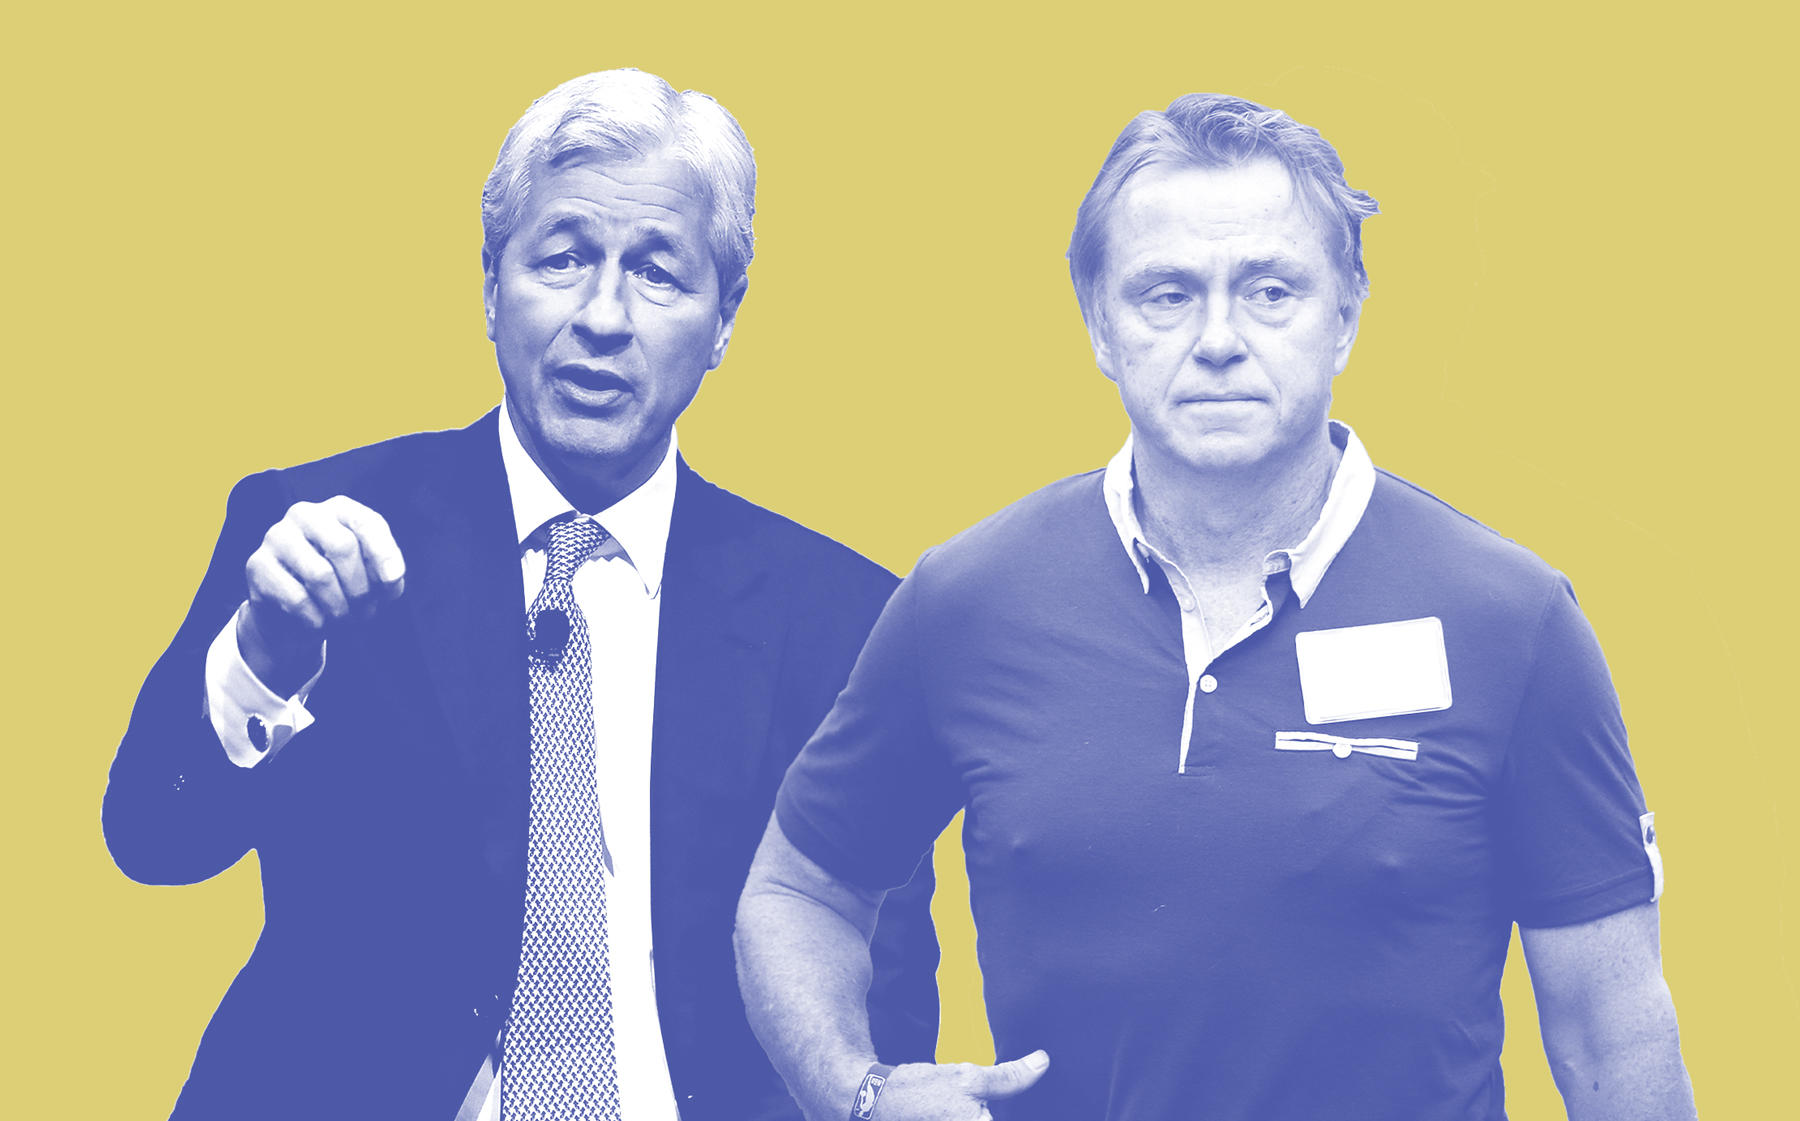 JPMorgan Chase's Jamie Dimon and Fortress Investment Group's Wes Edens (Dimon via Mark Wilson/Getty Images; Edens via Scott Olson/Getty Images)